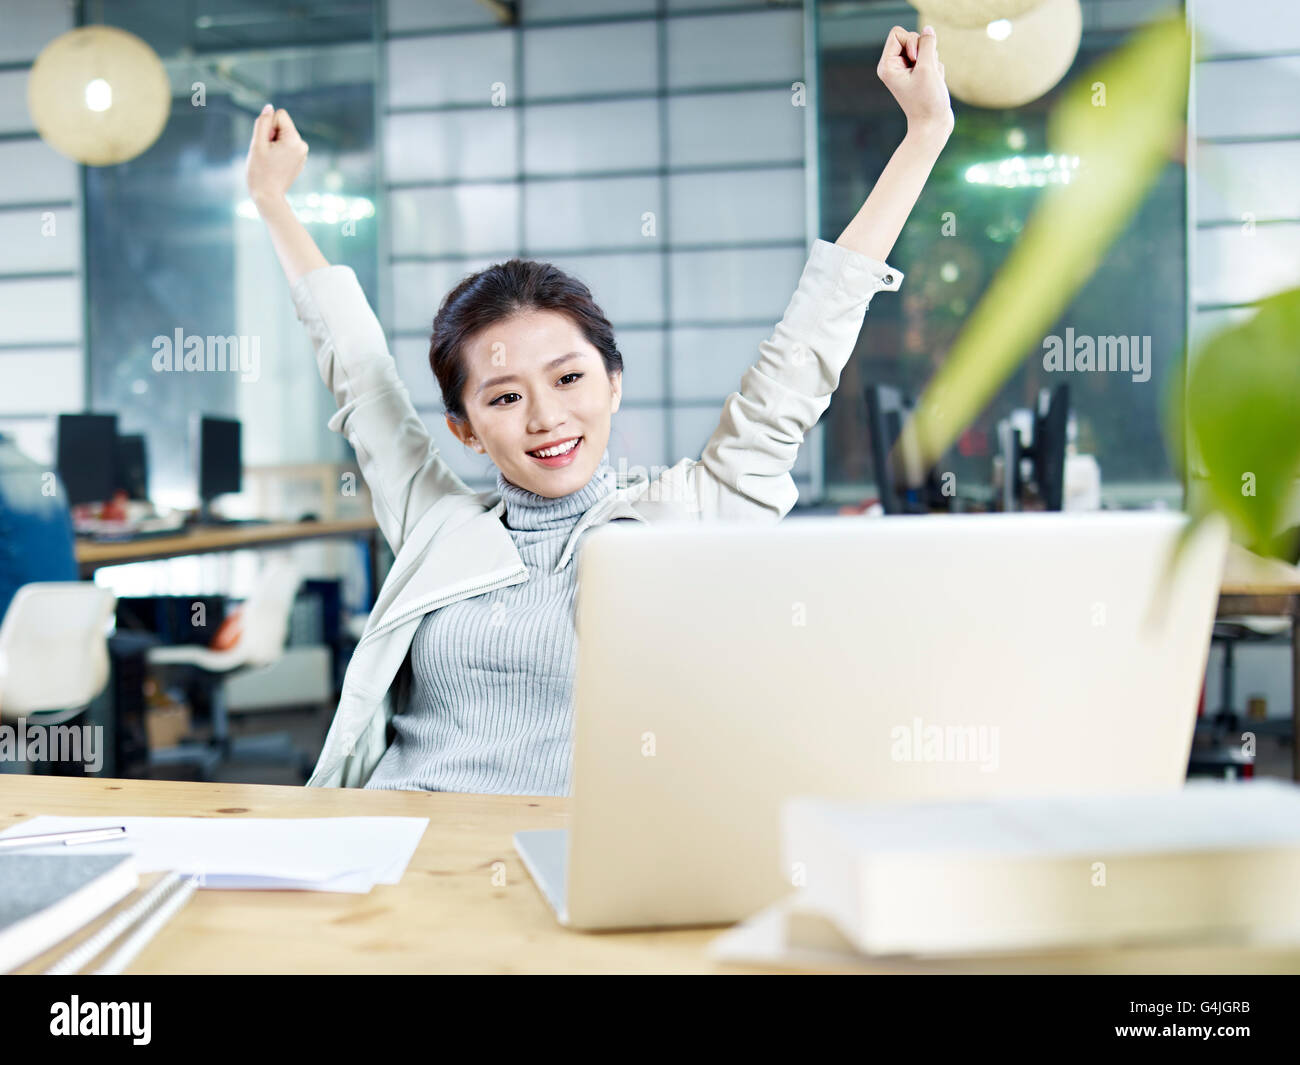 Young Asian business woman celebrating with arms raised in office. Banque D'Images